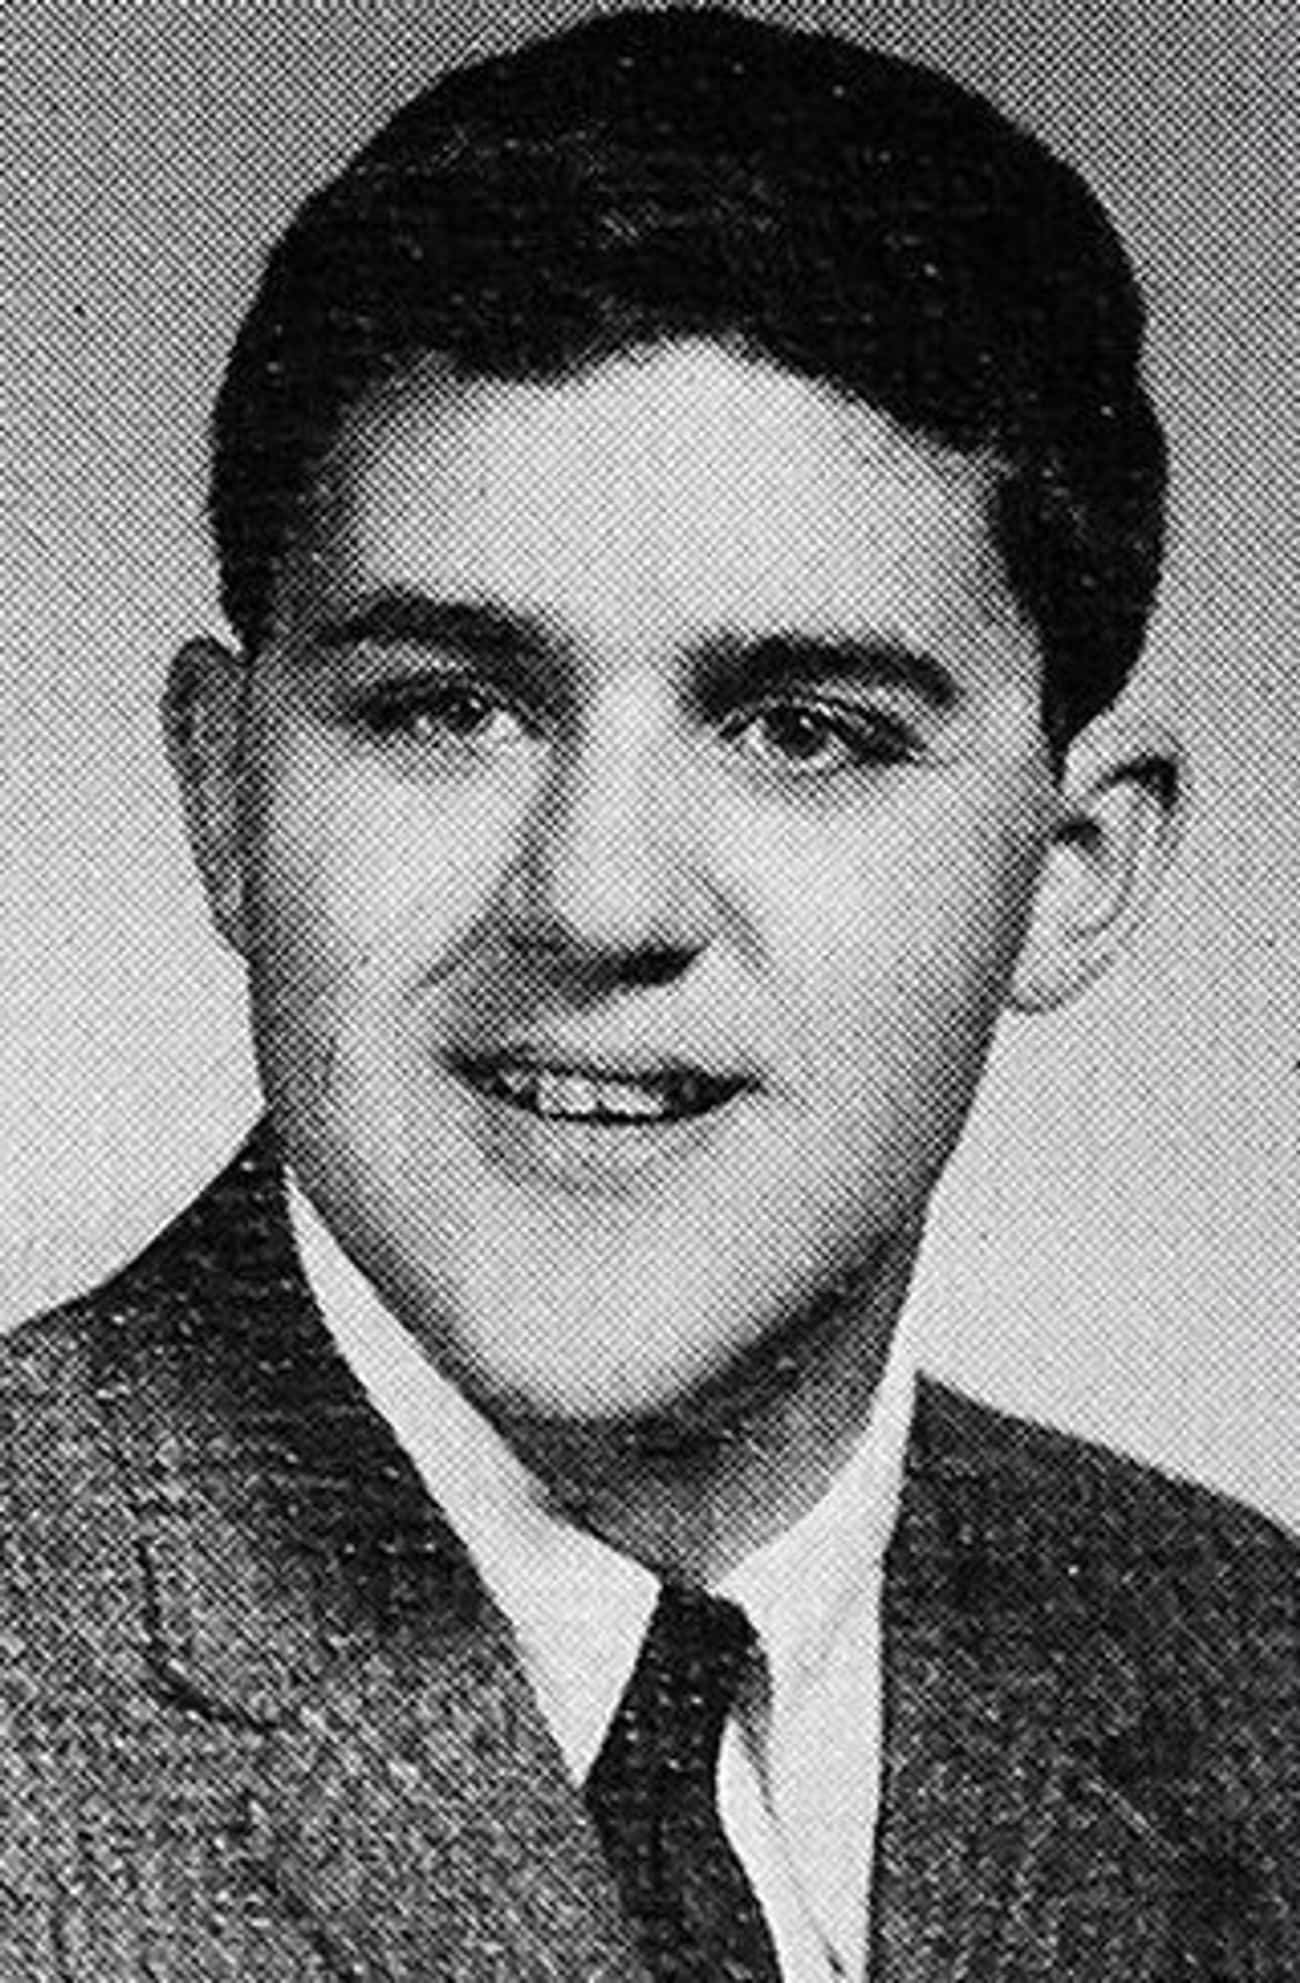 Young Jay Leno in Suit and Tie